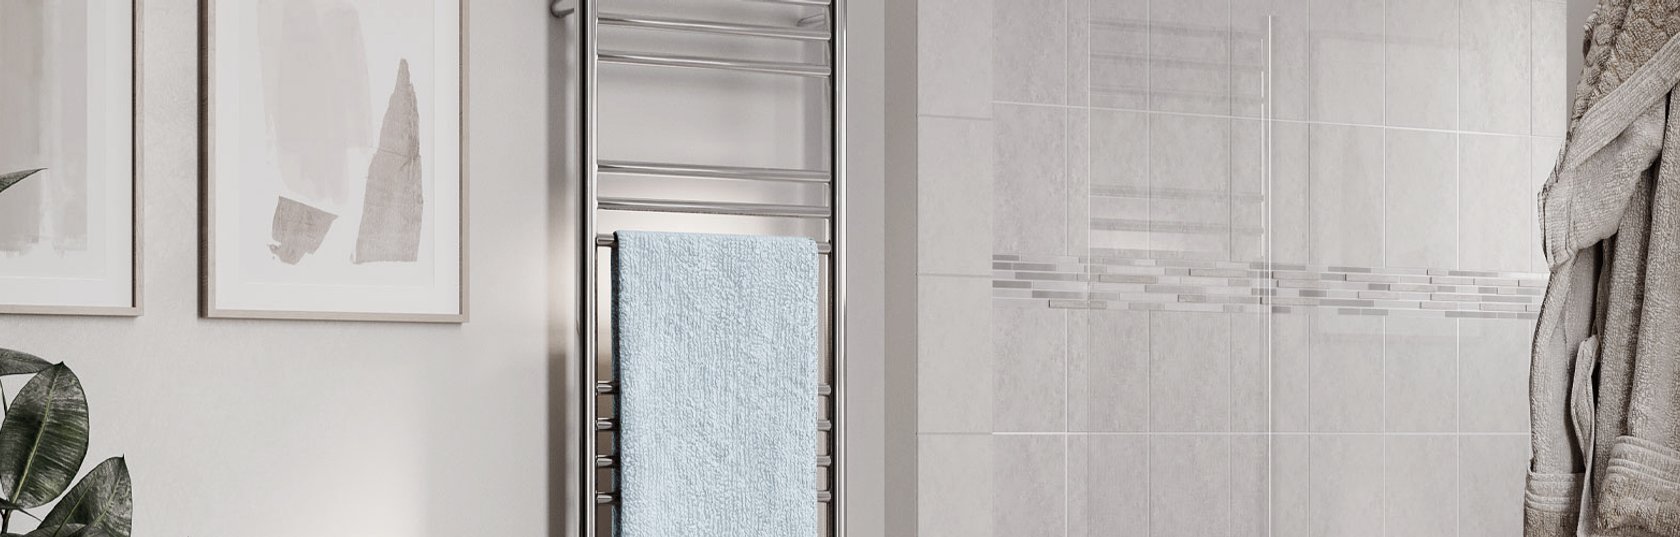 Questions To Ask When Buying A Heated Towel Rail